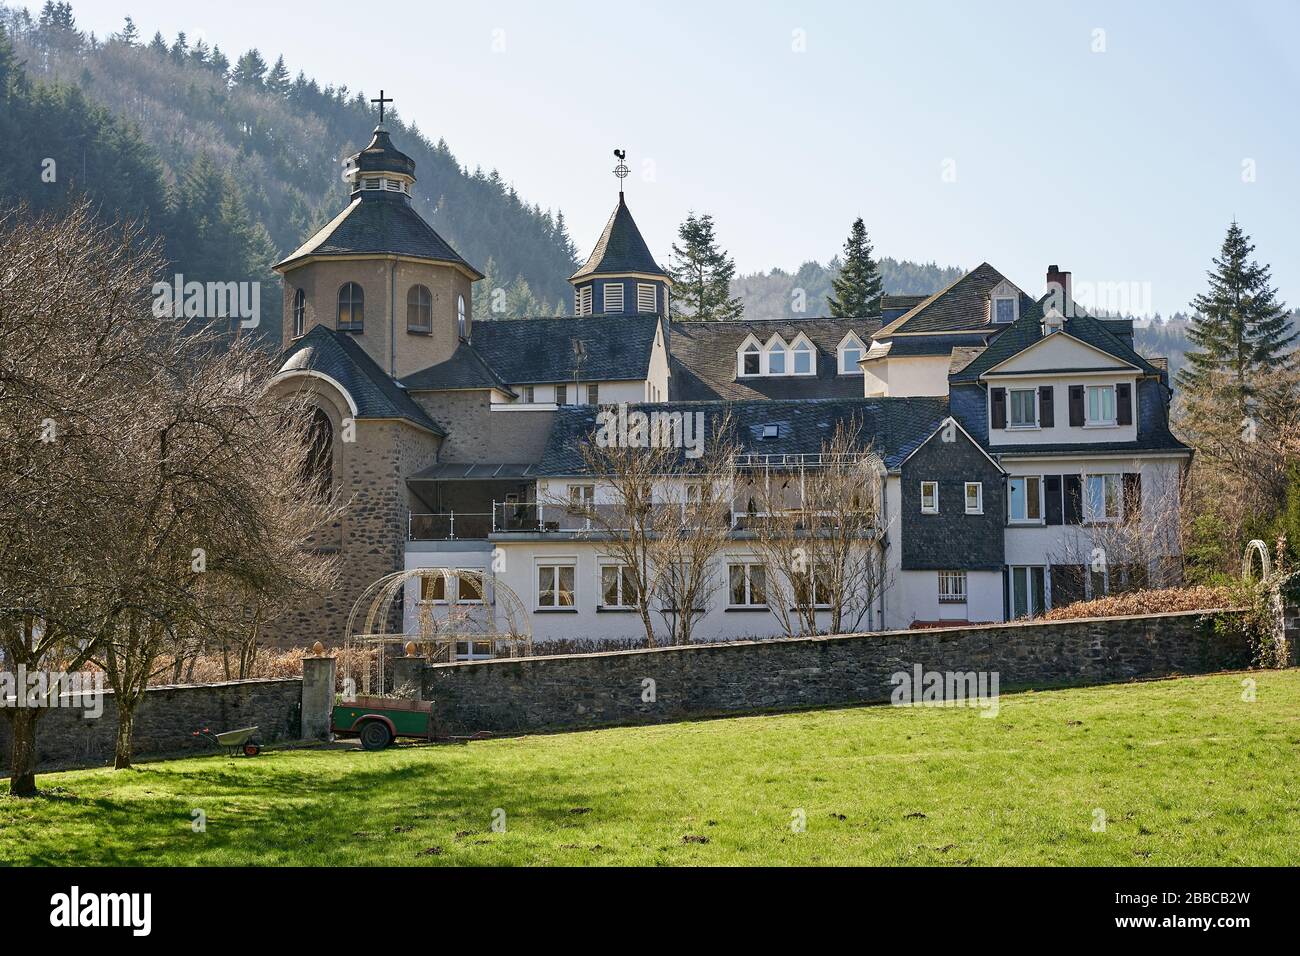 Mayen, Germany. 25th Mar, 2020. Helgoland Monastery. The former Franciscan convent is now used as a student residence. (To dpa New hustle and bustle in old walls - monasteries experience new uses) Credit: Thomas Frey/dpa/Alamy Live News Stock Photo